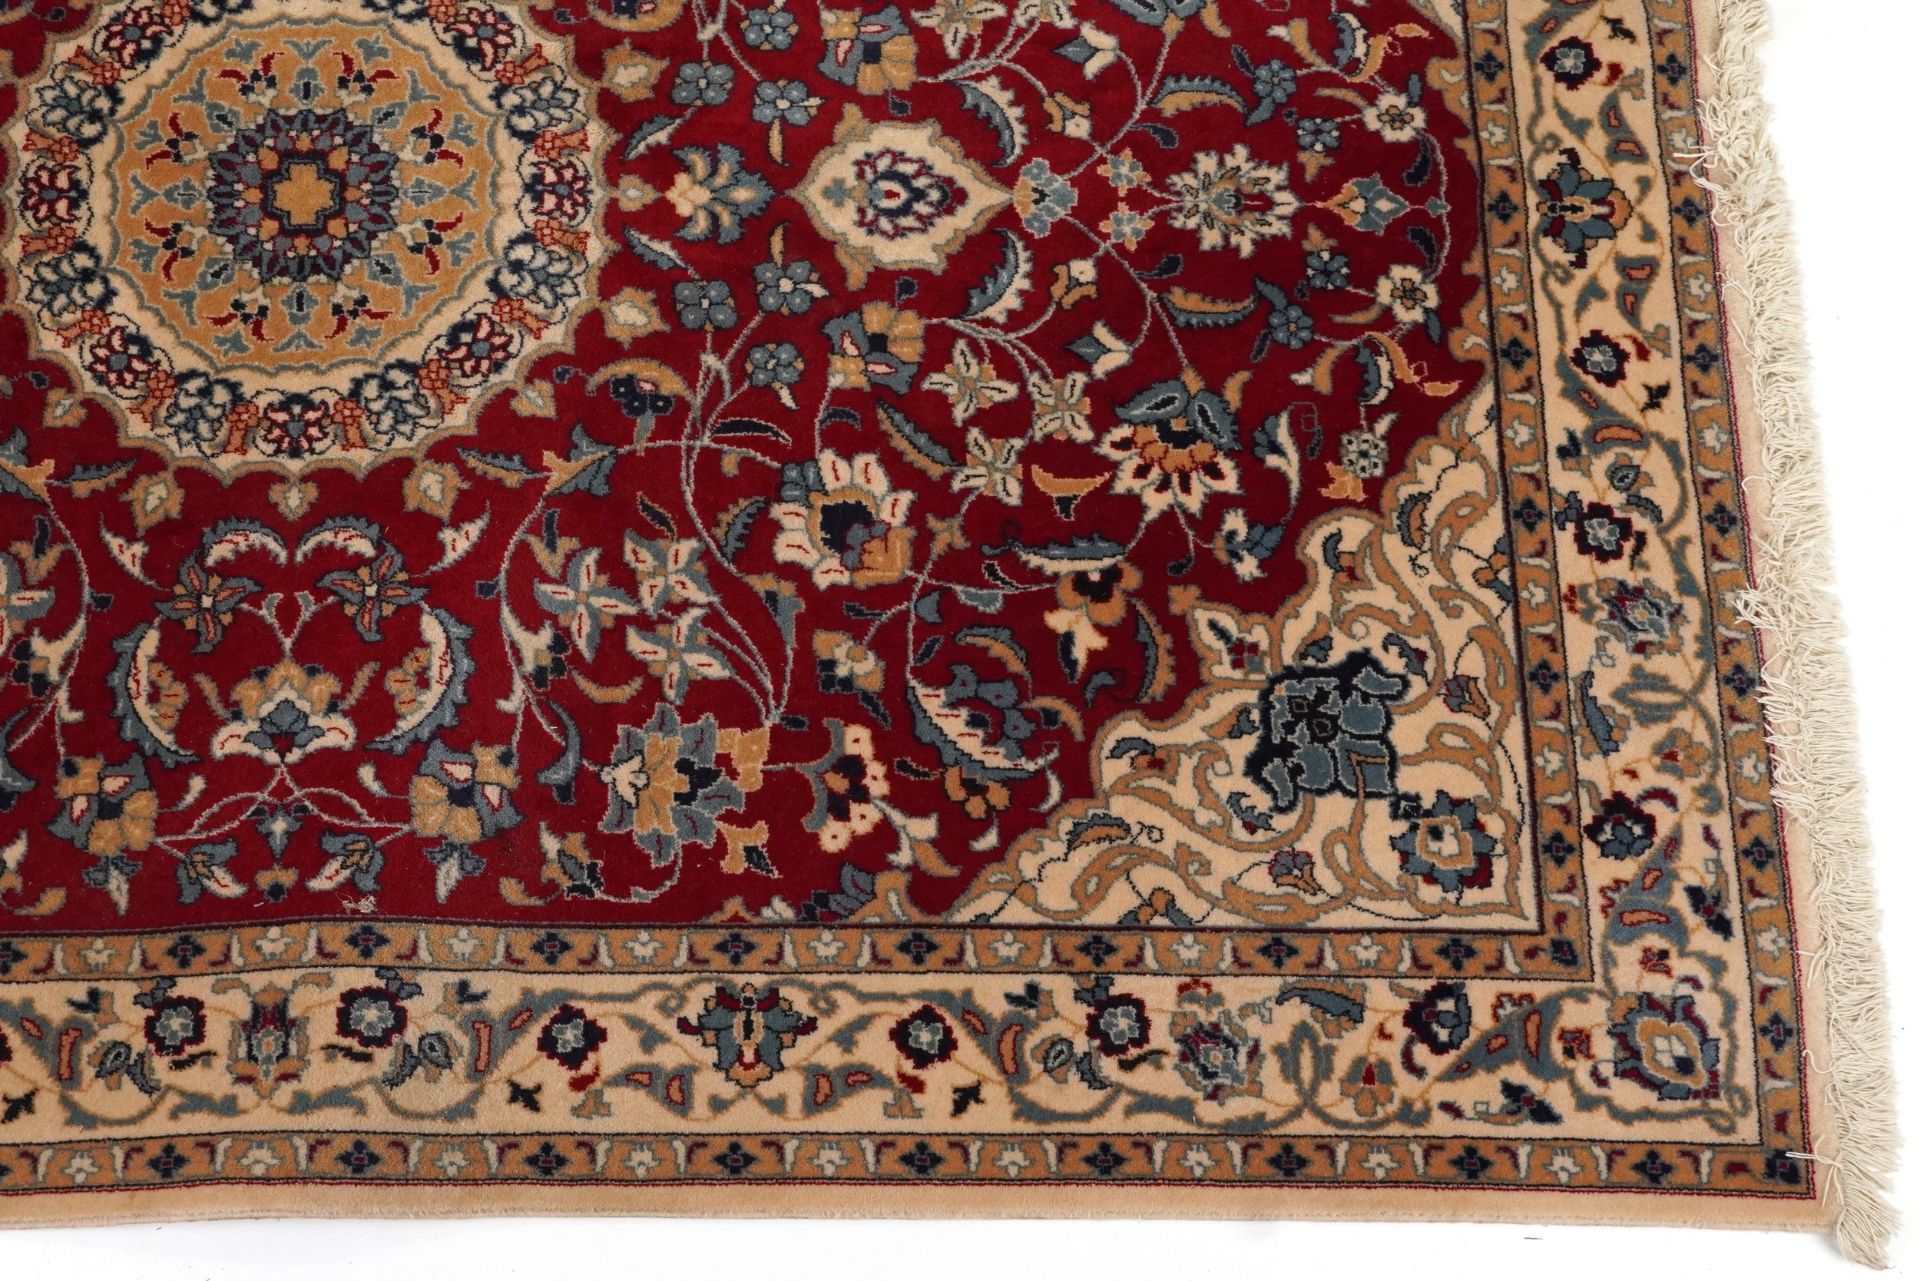 Rectangular Indian Rani rug having an allover repeat floral design on the red and cream grounds, - Image 5 of 6